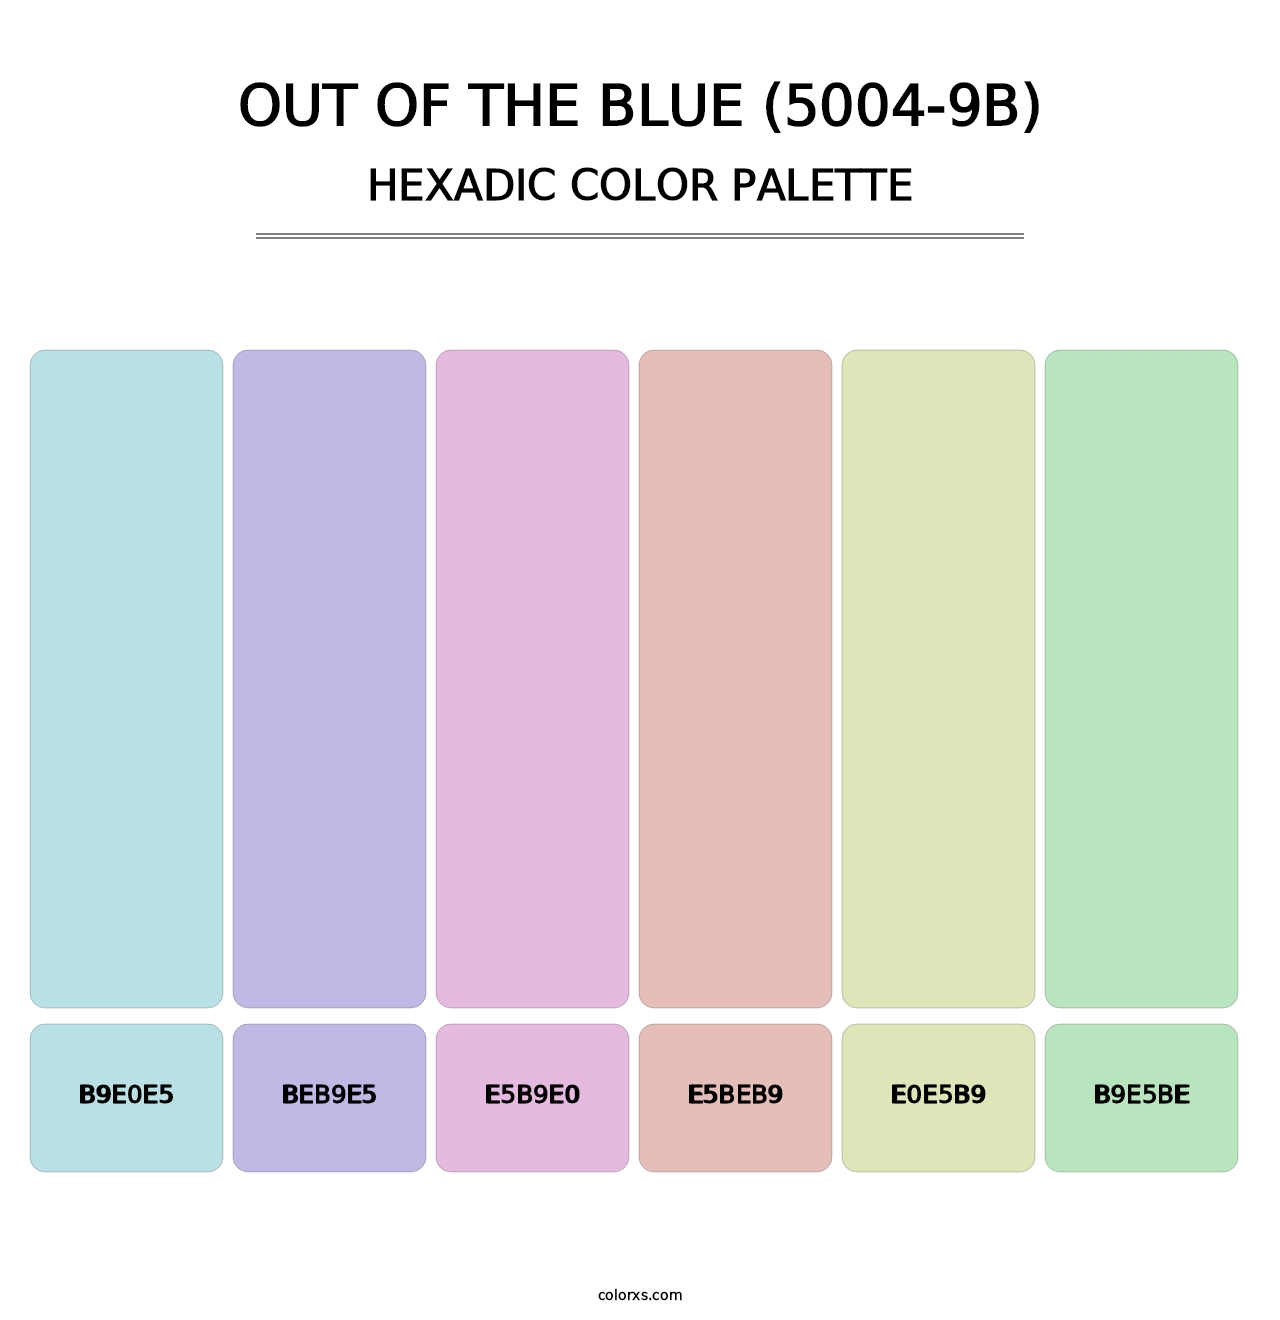 Out of the Blue (5004-9B) - Hexadic Color Palette